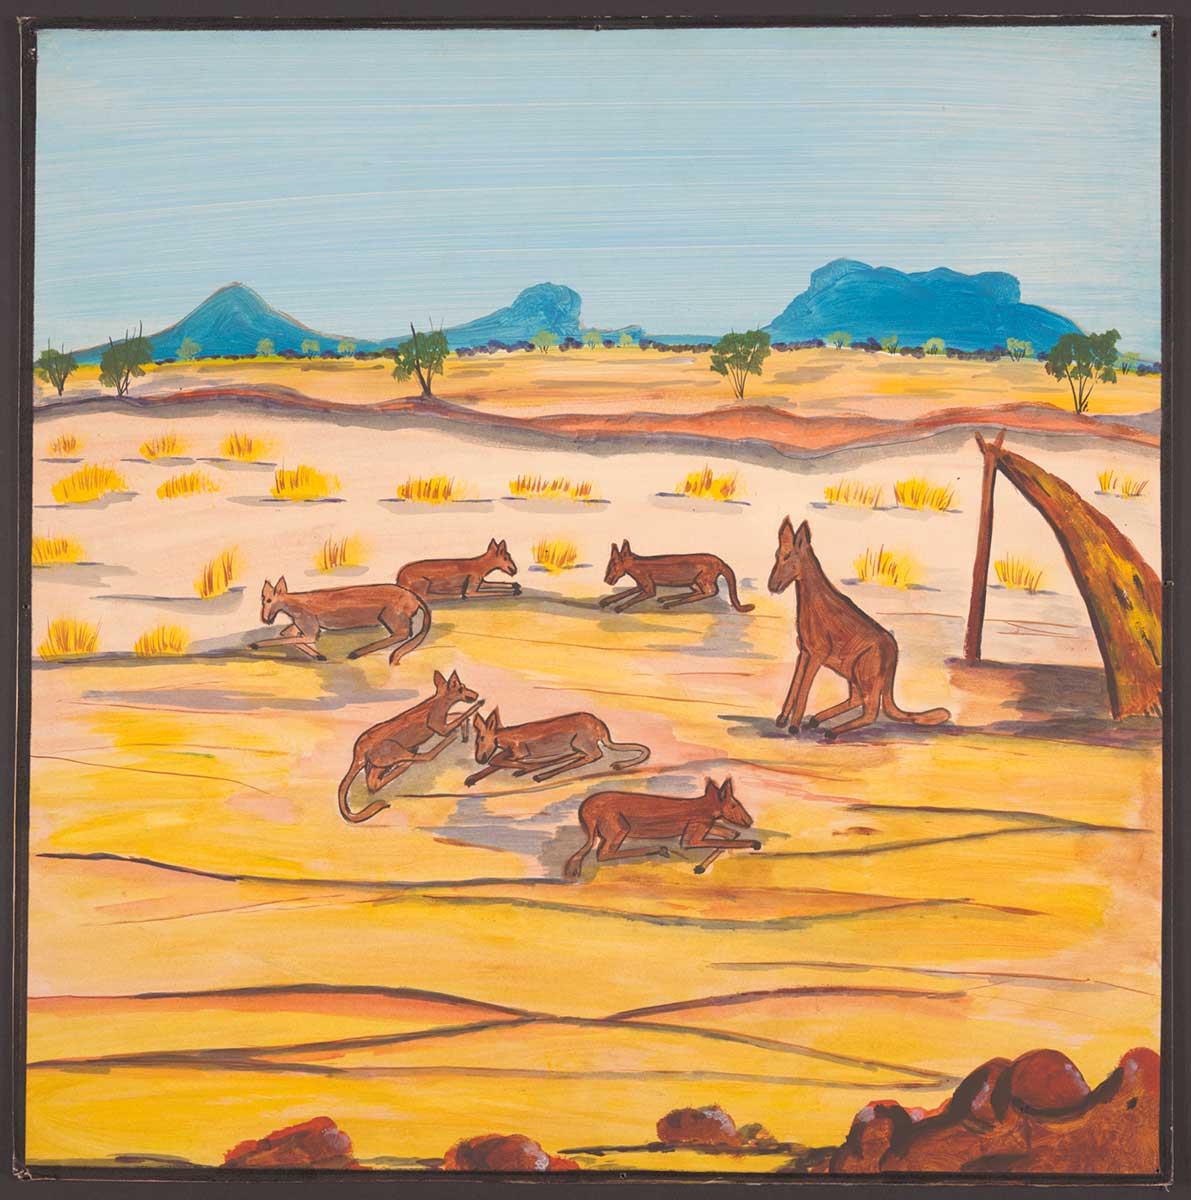 Coloured illustration of a desert landscape with one large sitting dingo and six others lying down, with a bark shelter close by.